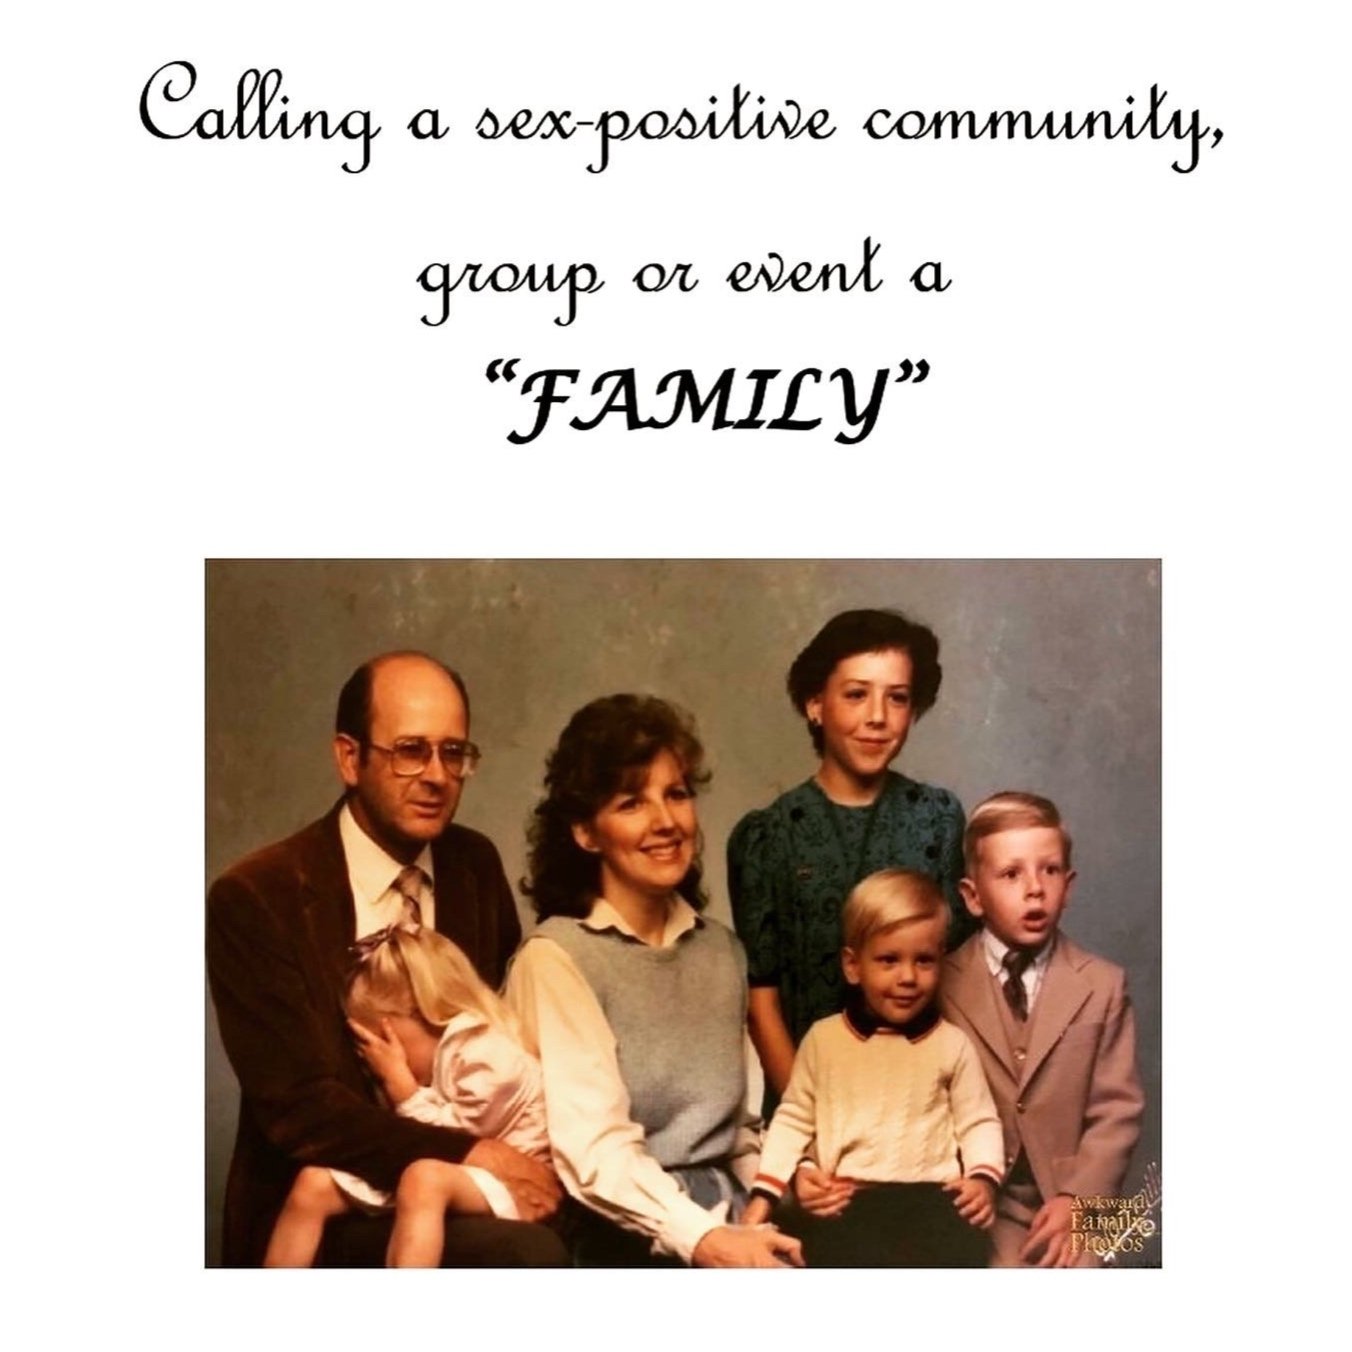 Calling A Sex-Positive Community, Group Or Event A "Family" - And Why It Is A Red Flag - New Zine by Beata 📖